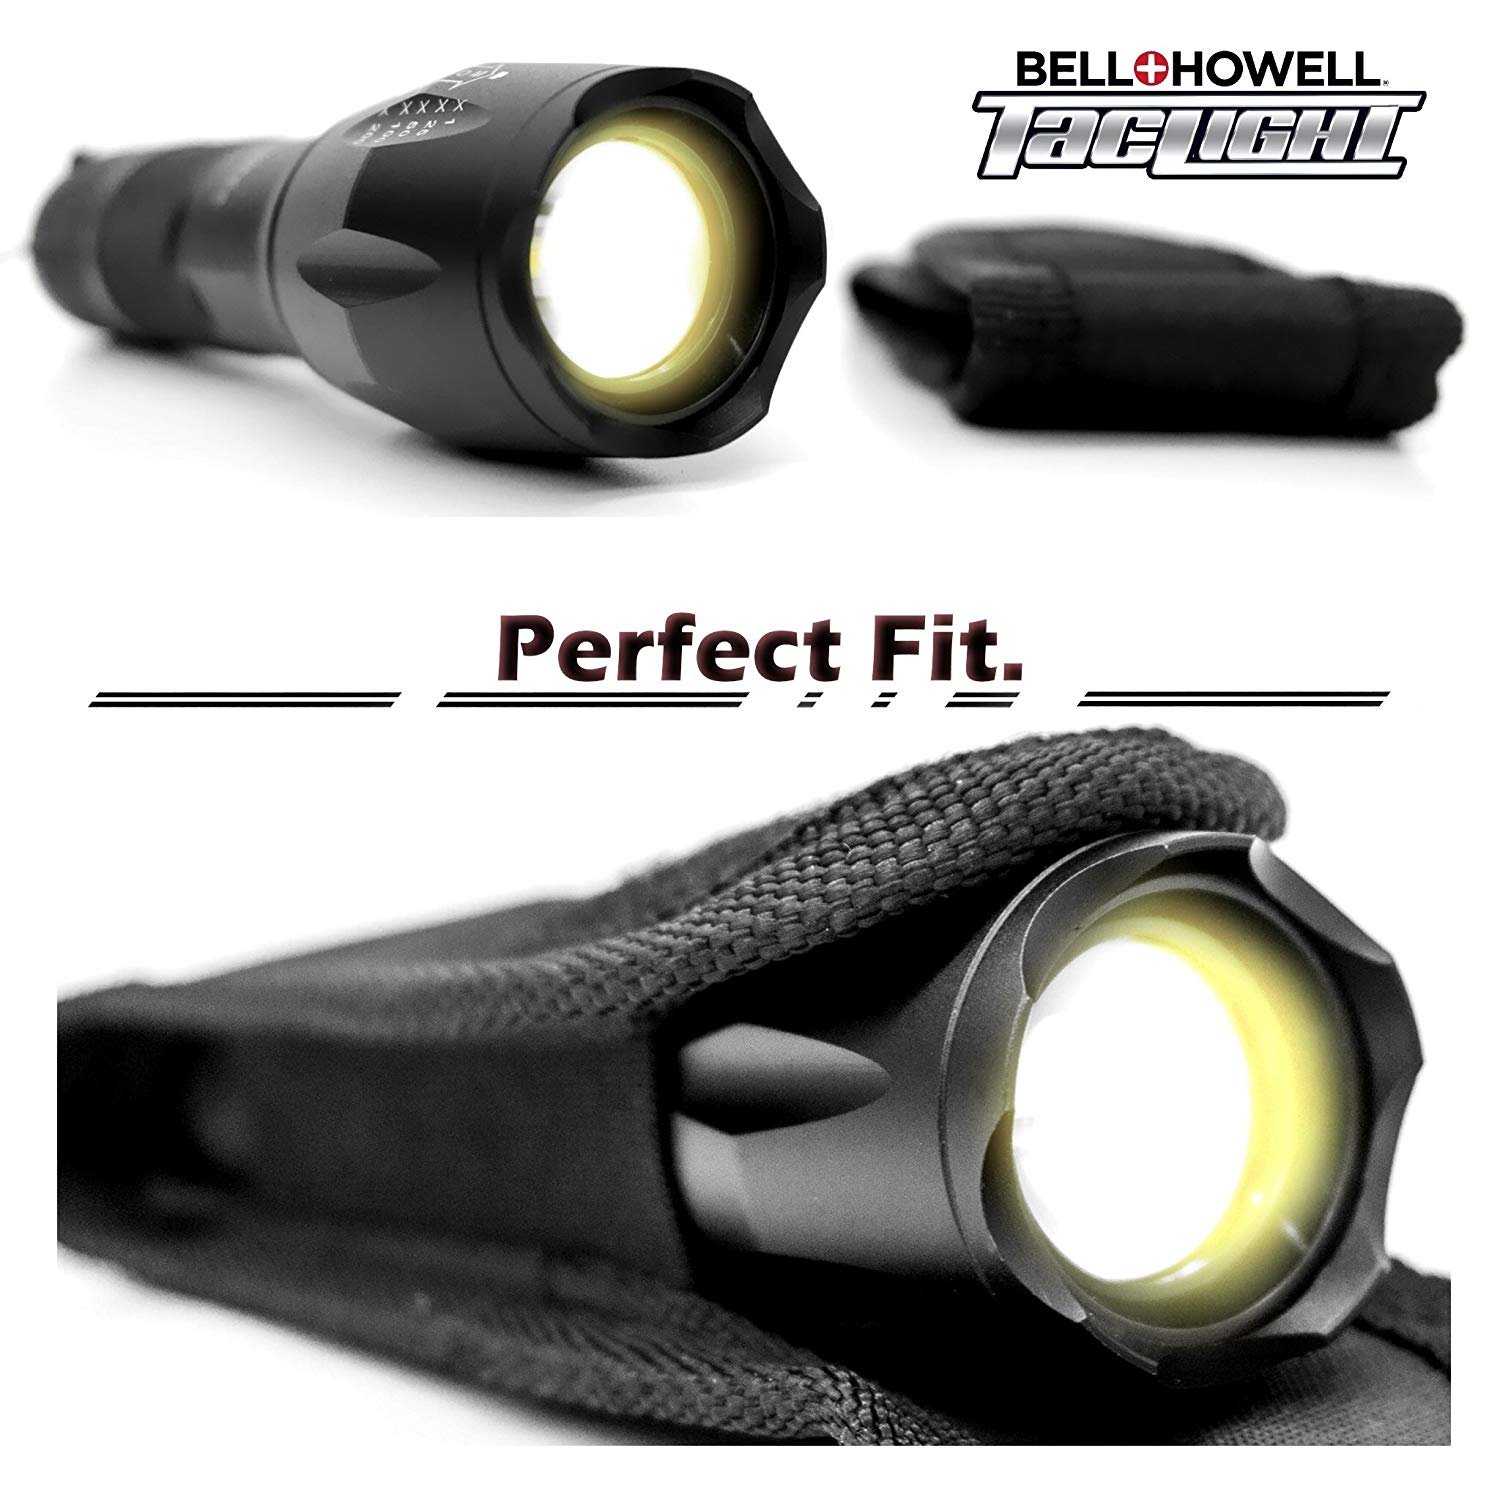 Bell Howell TACLIGHT FLASHLIGHT Military-Grade, Magnetic Base w/Holster,  Modes  Zoom Function As Seen On TV 40x Brighter